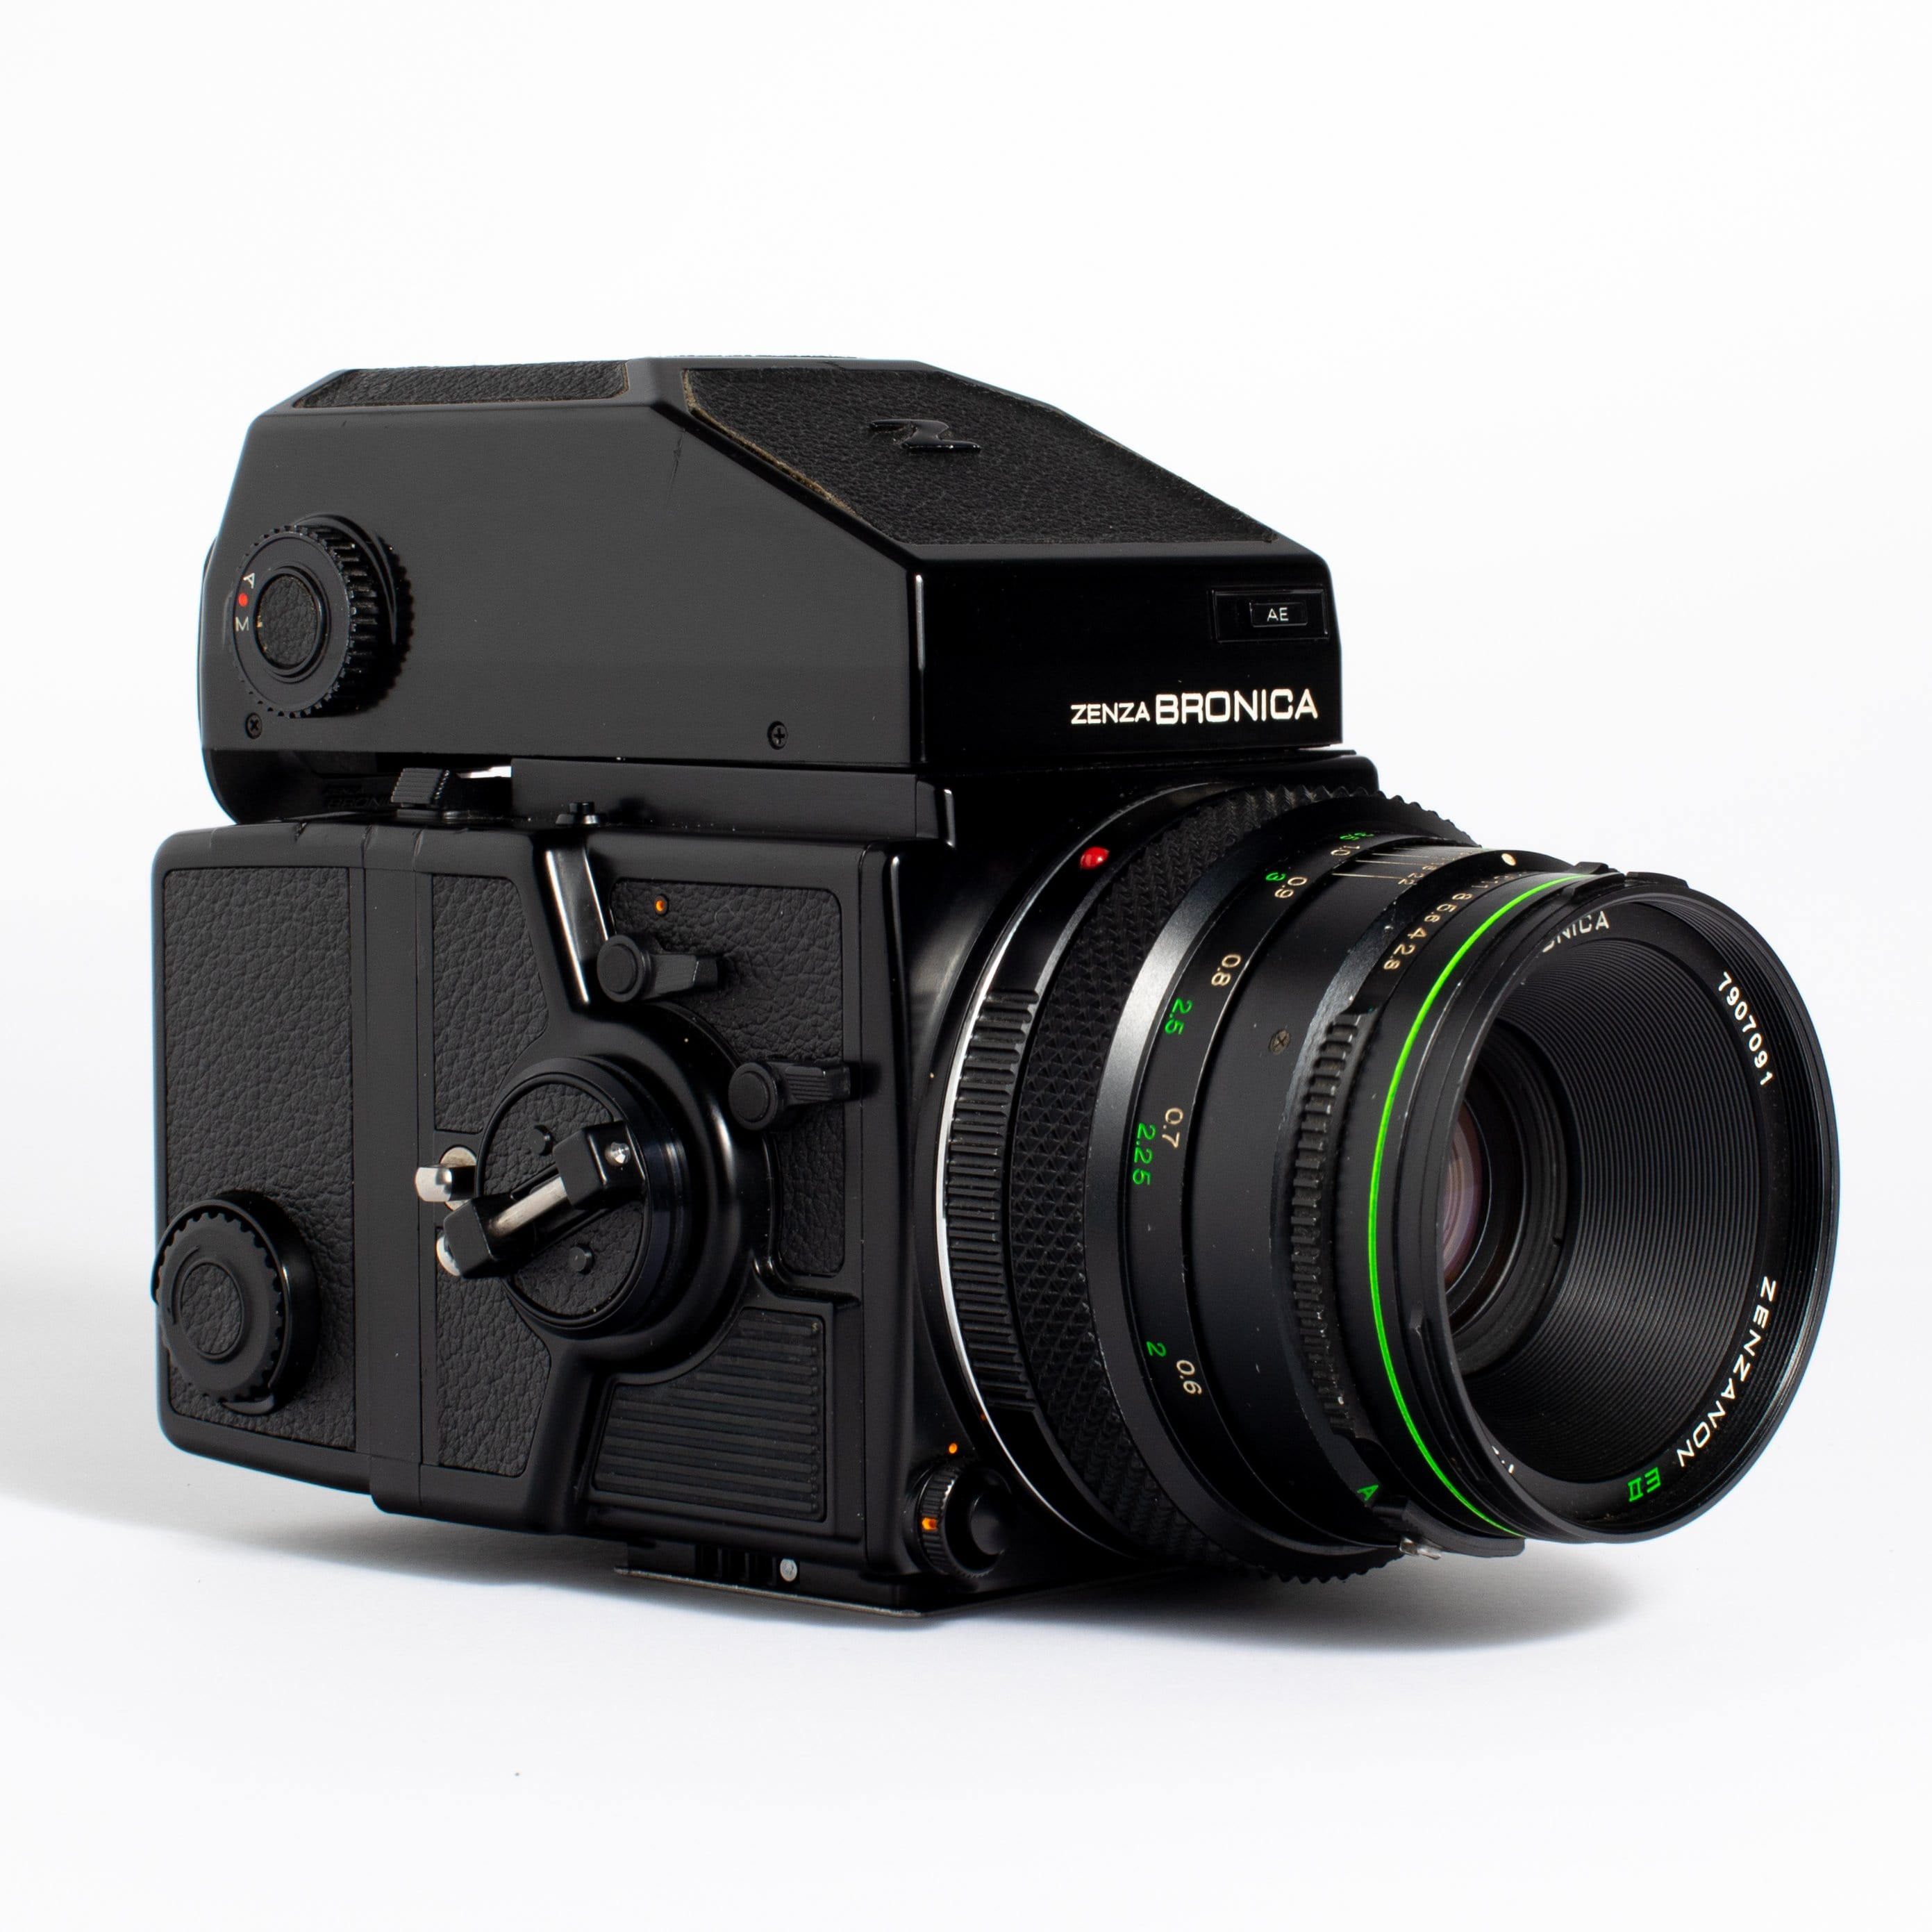 Zenza Bronica ETRSi with 75mm F2.8 Lens – Film Supply Club